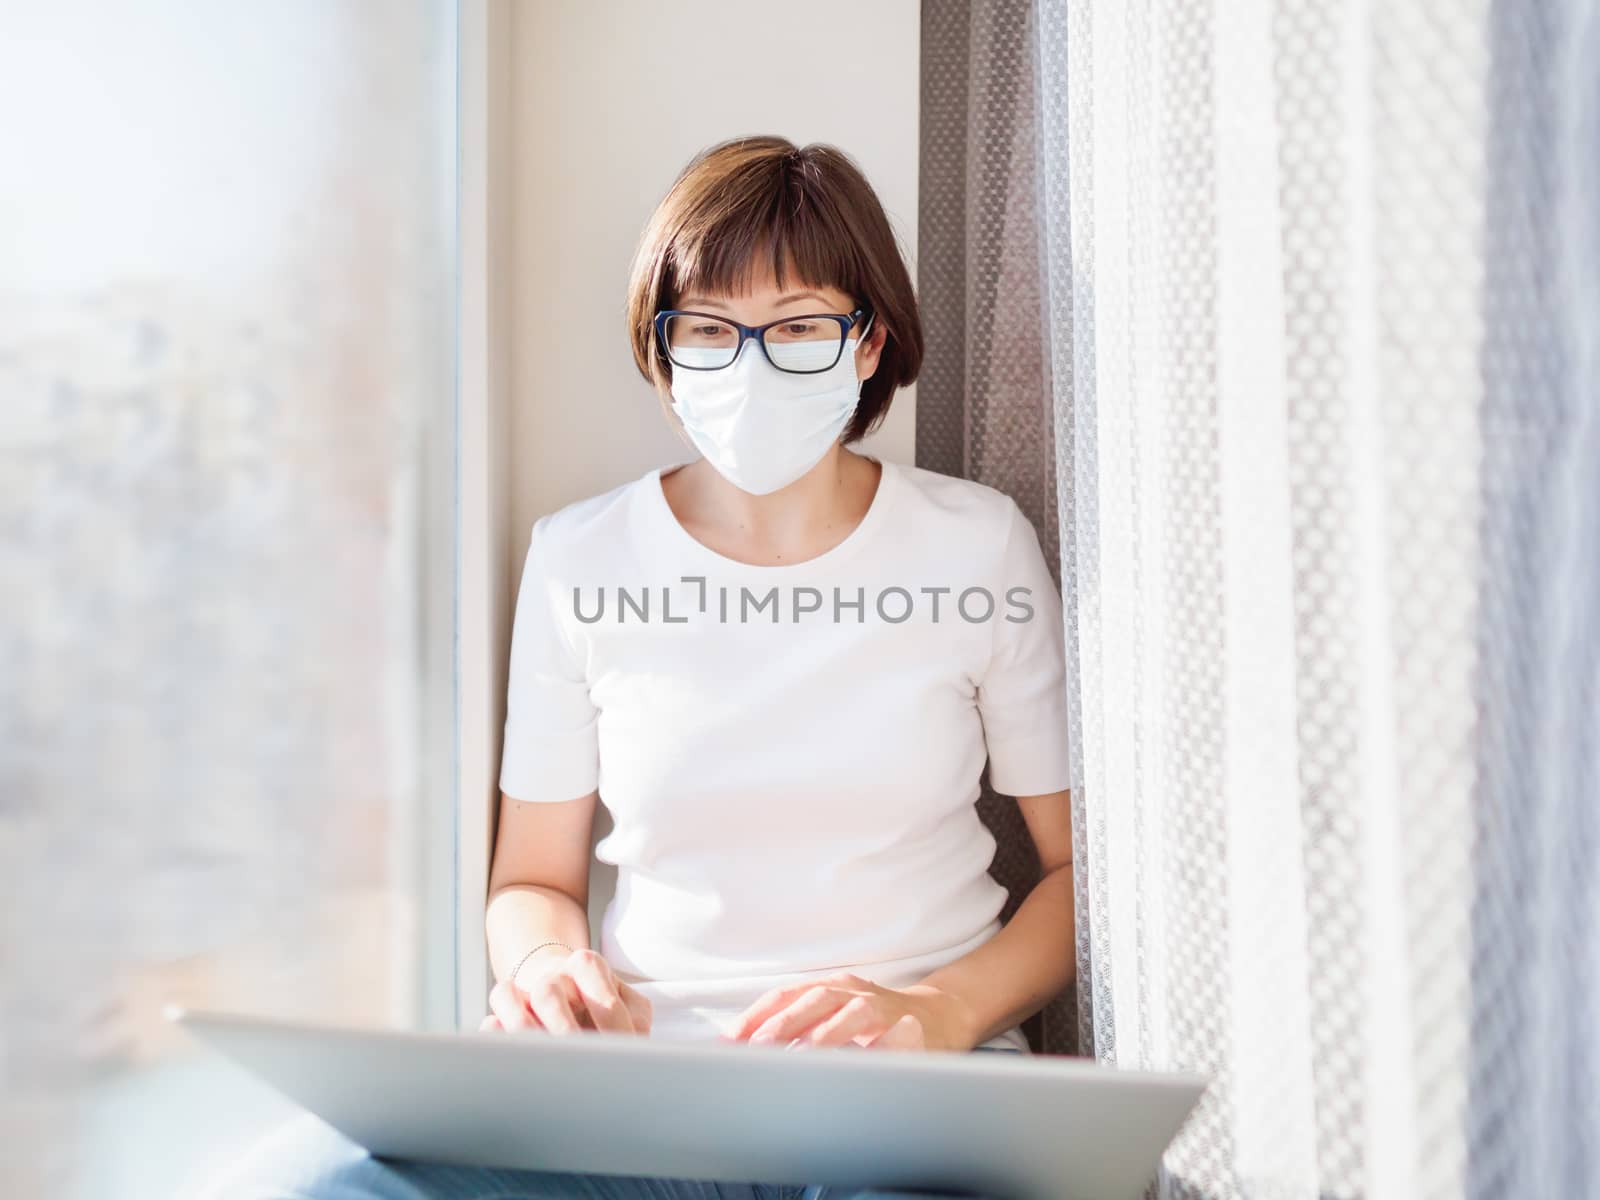 Pretty woman in medical mask works remotely from home. She sits on window sill with laptop on knees. Lockdown quarantine because of coronavirus COVID19. Self isolation at home.